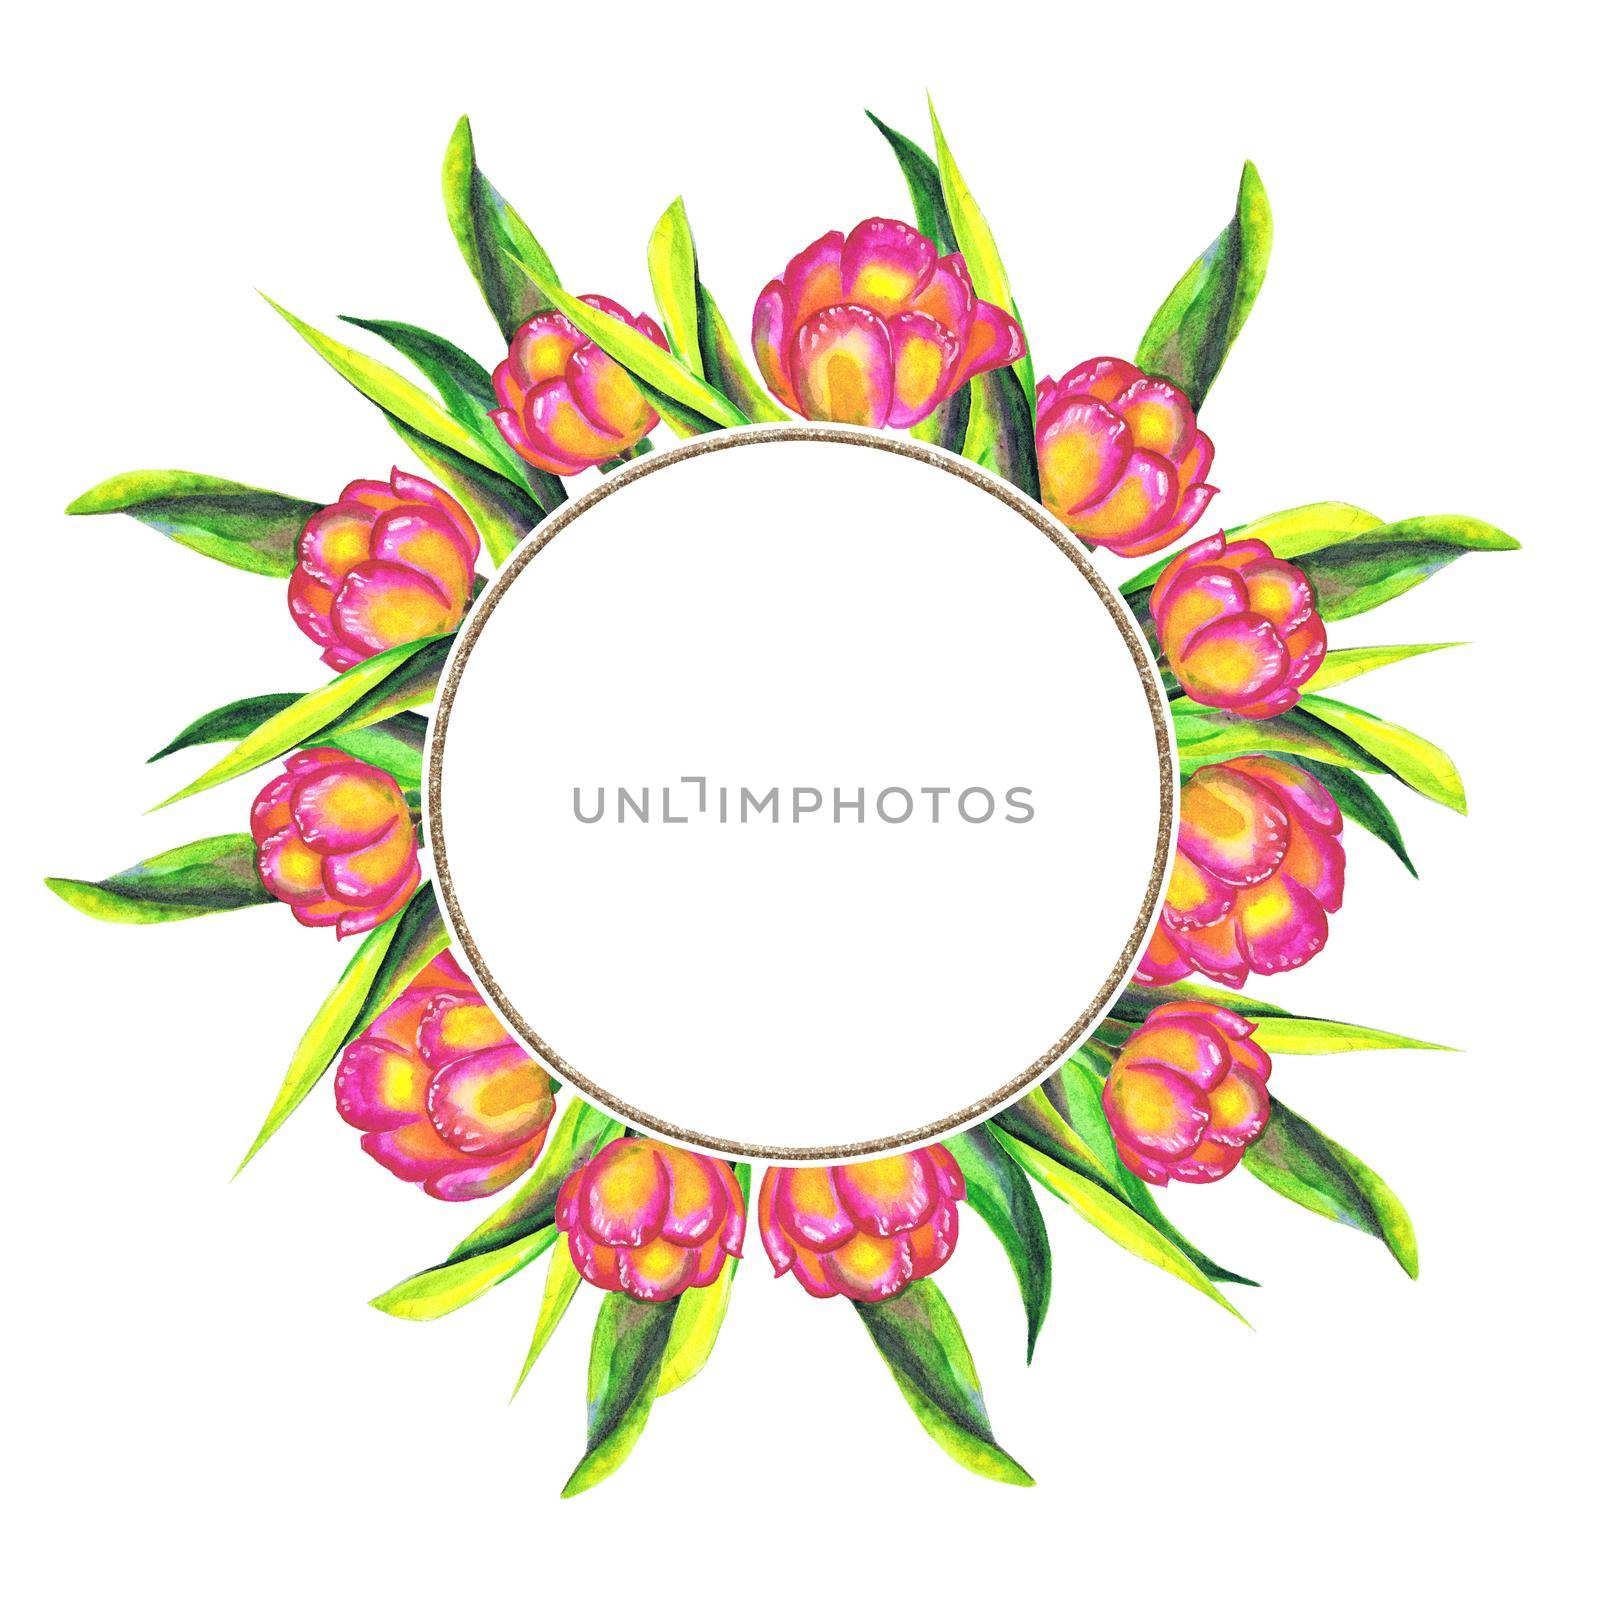 Tulips flowers hand drawn round frame for poster layout, sketch for engraving illustration. Tulips frame or badge design for invitation or business cards.